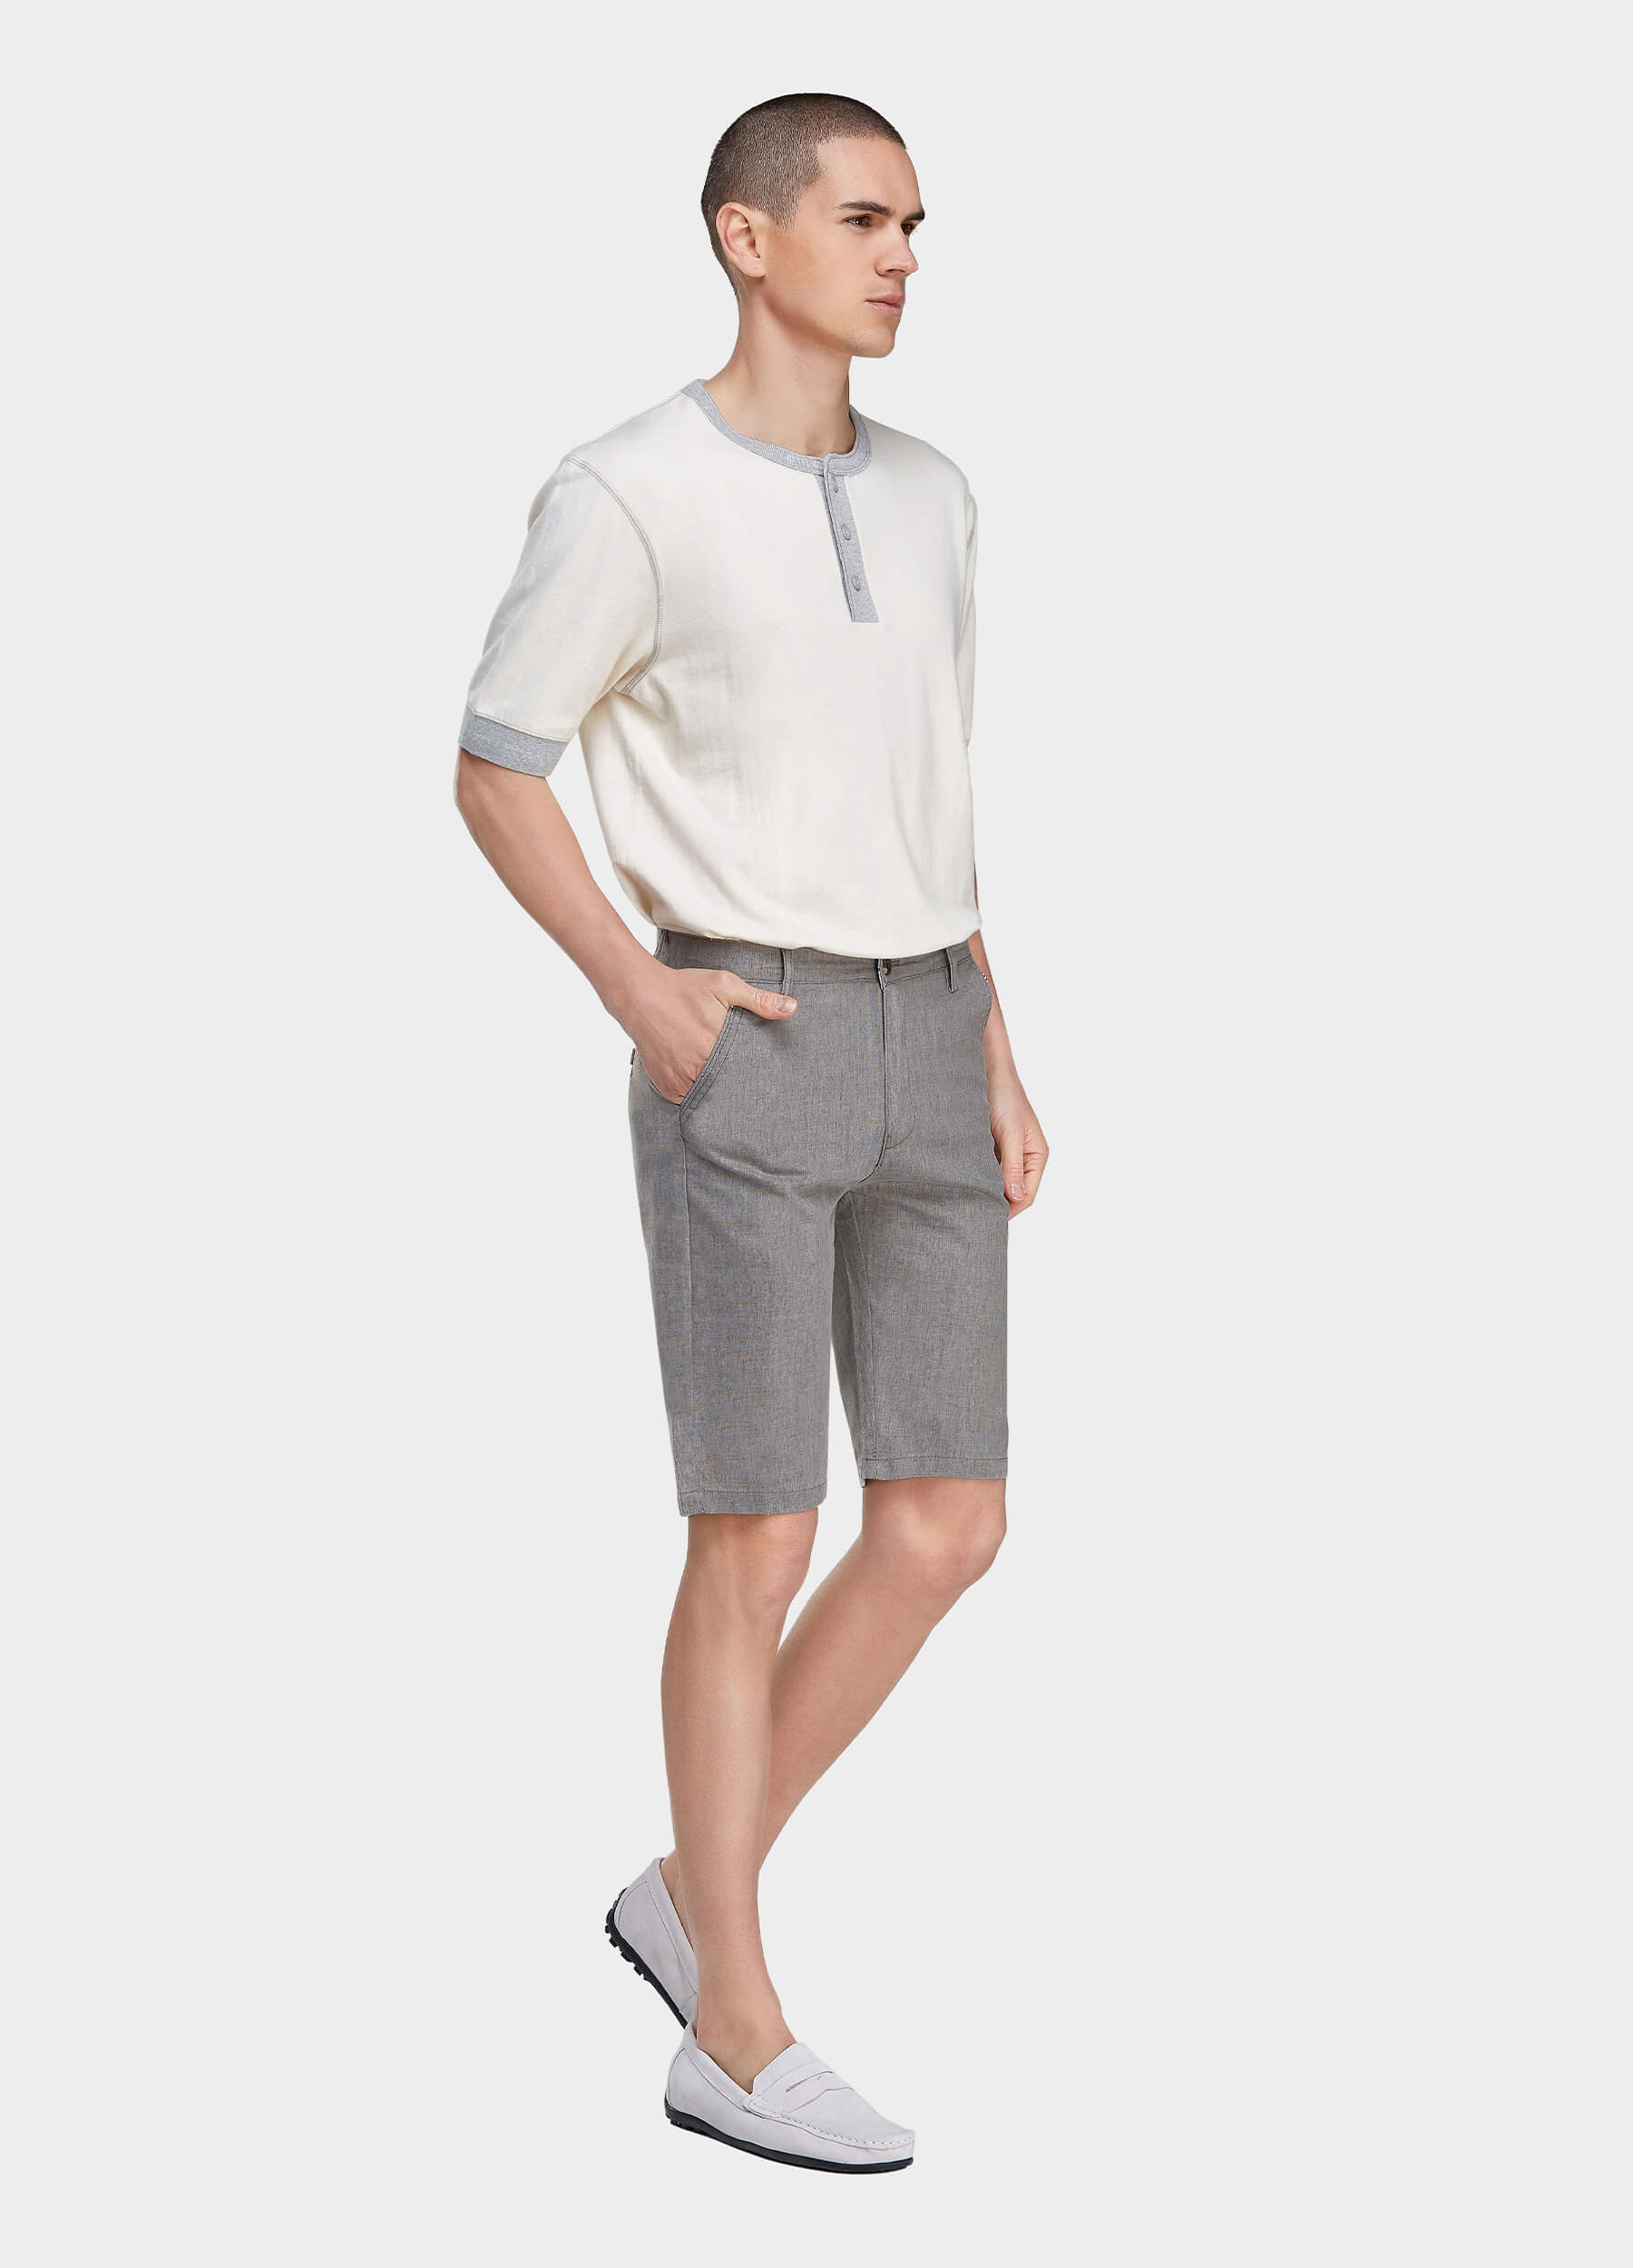 Men's Casual Solid Zipper Fly Button Walk Shorts with Slant Pockets-Grey side view